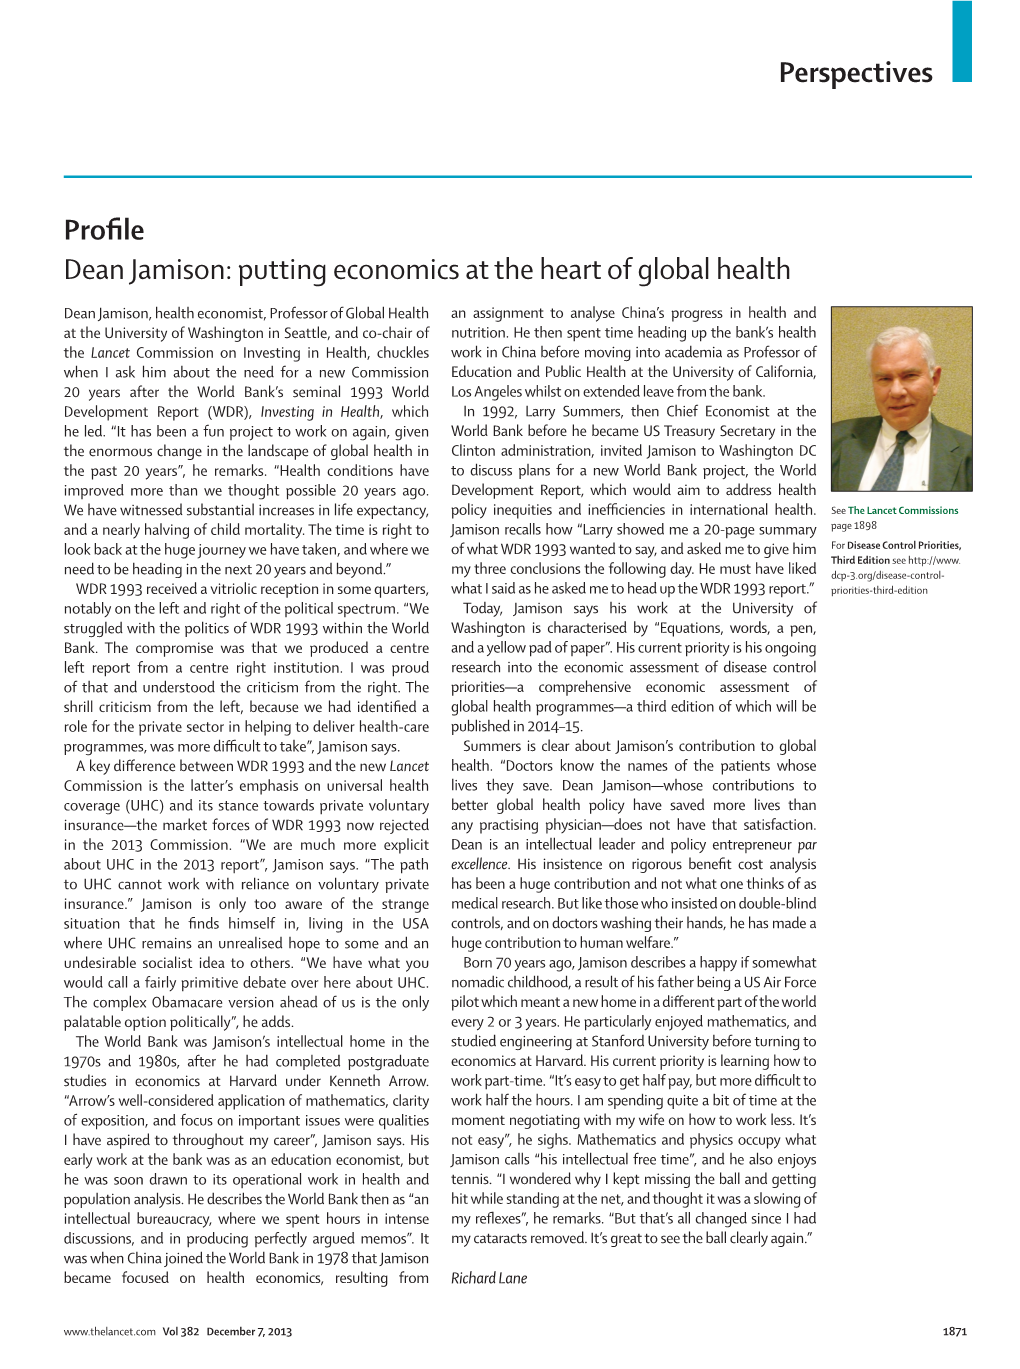 Dean Jamison: Putting Economics at the Heart of Global Health